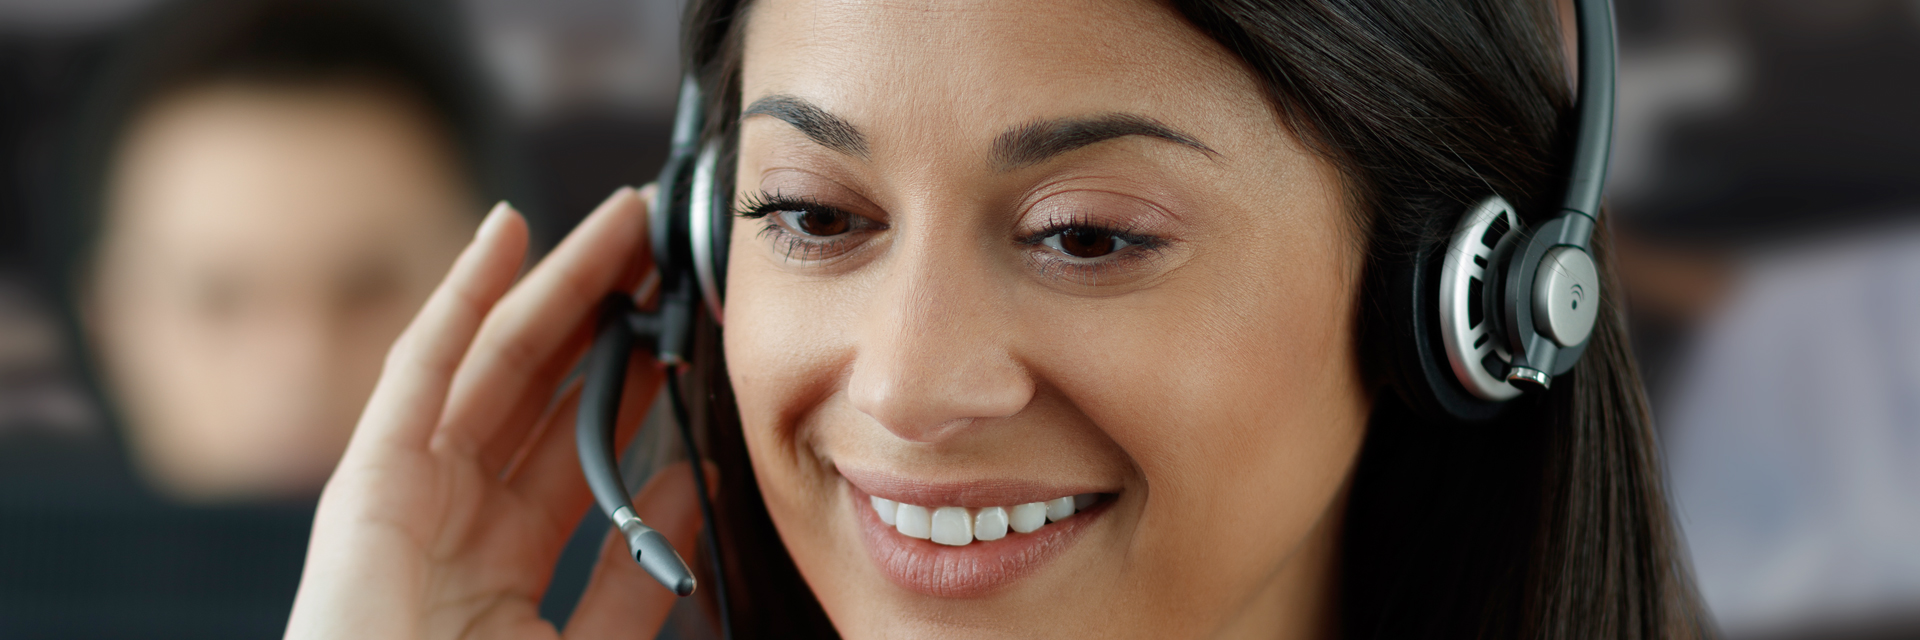 Woman answering the phone with a headset